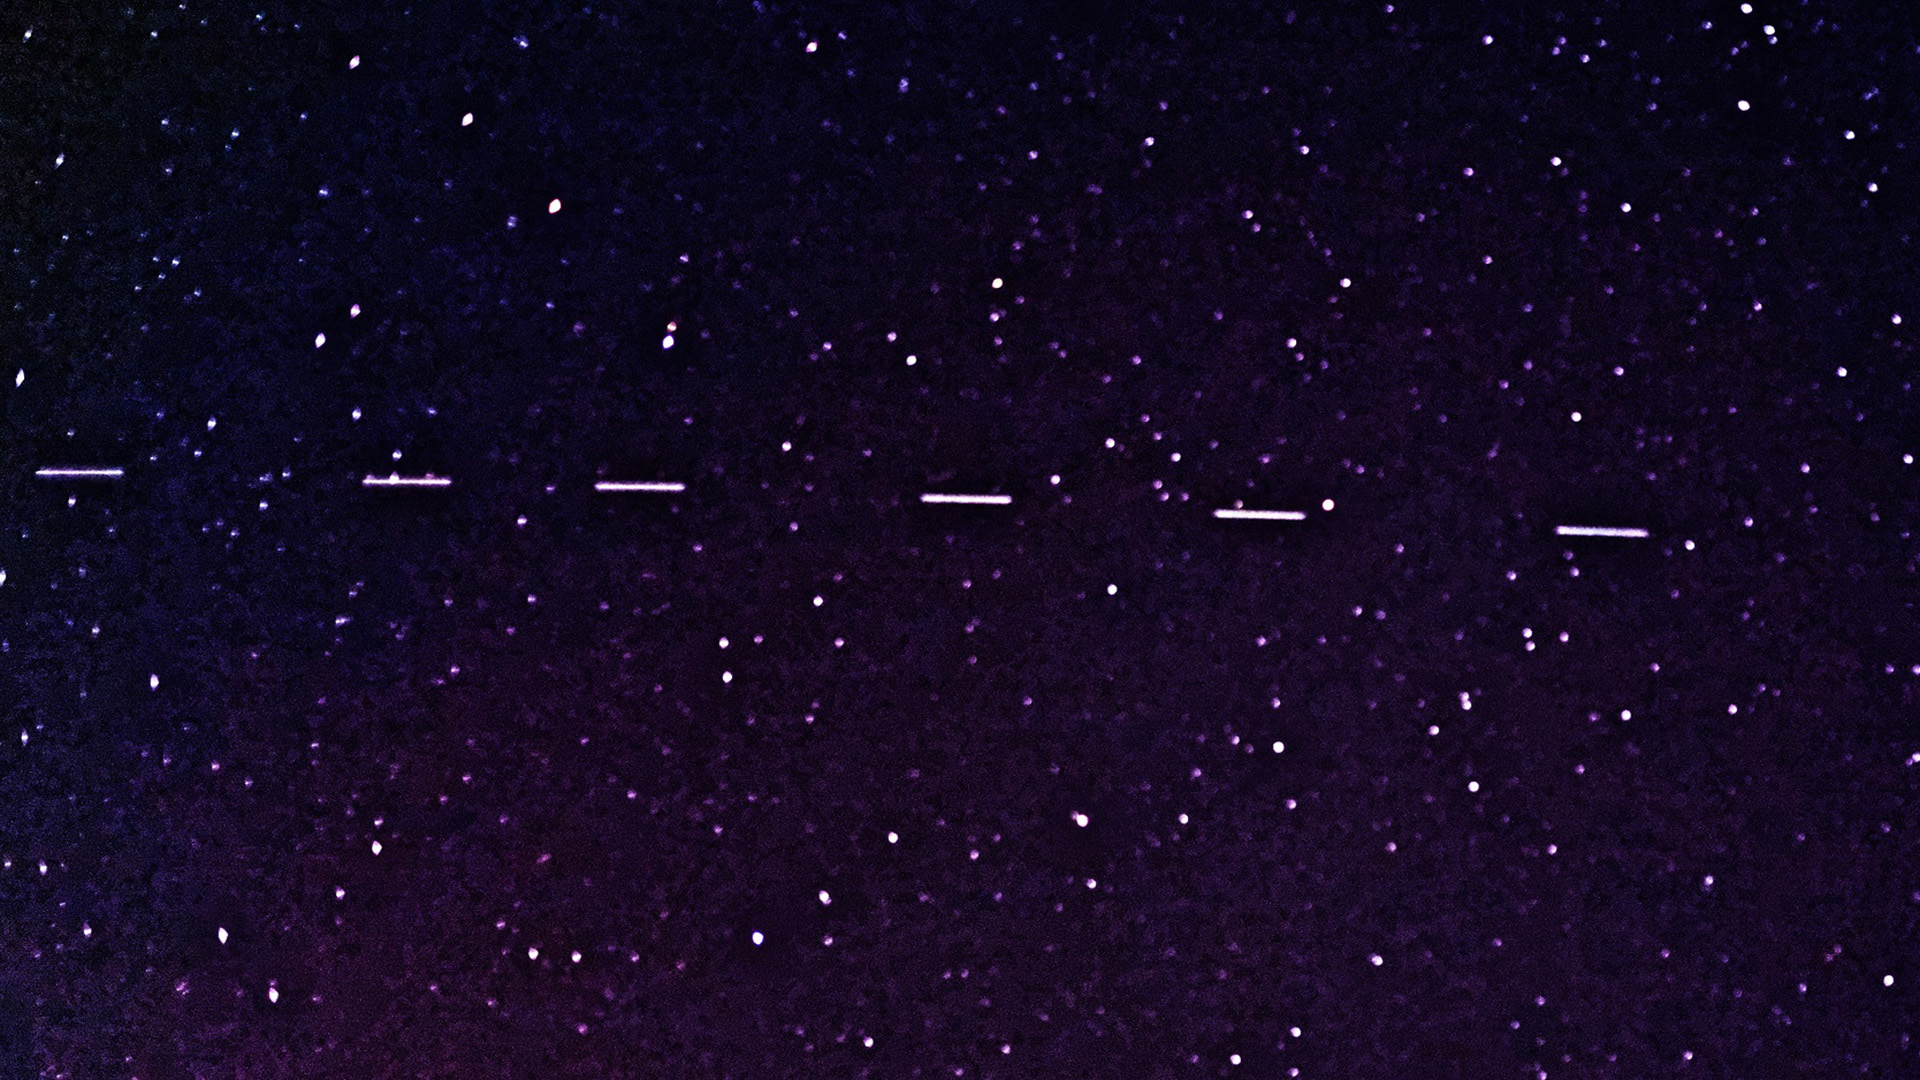 A 2-second image exposure shows Starlink satellites in front of a star field.